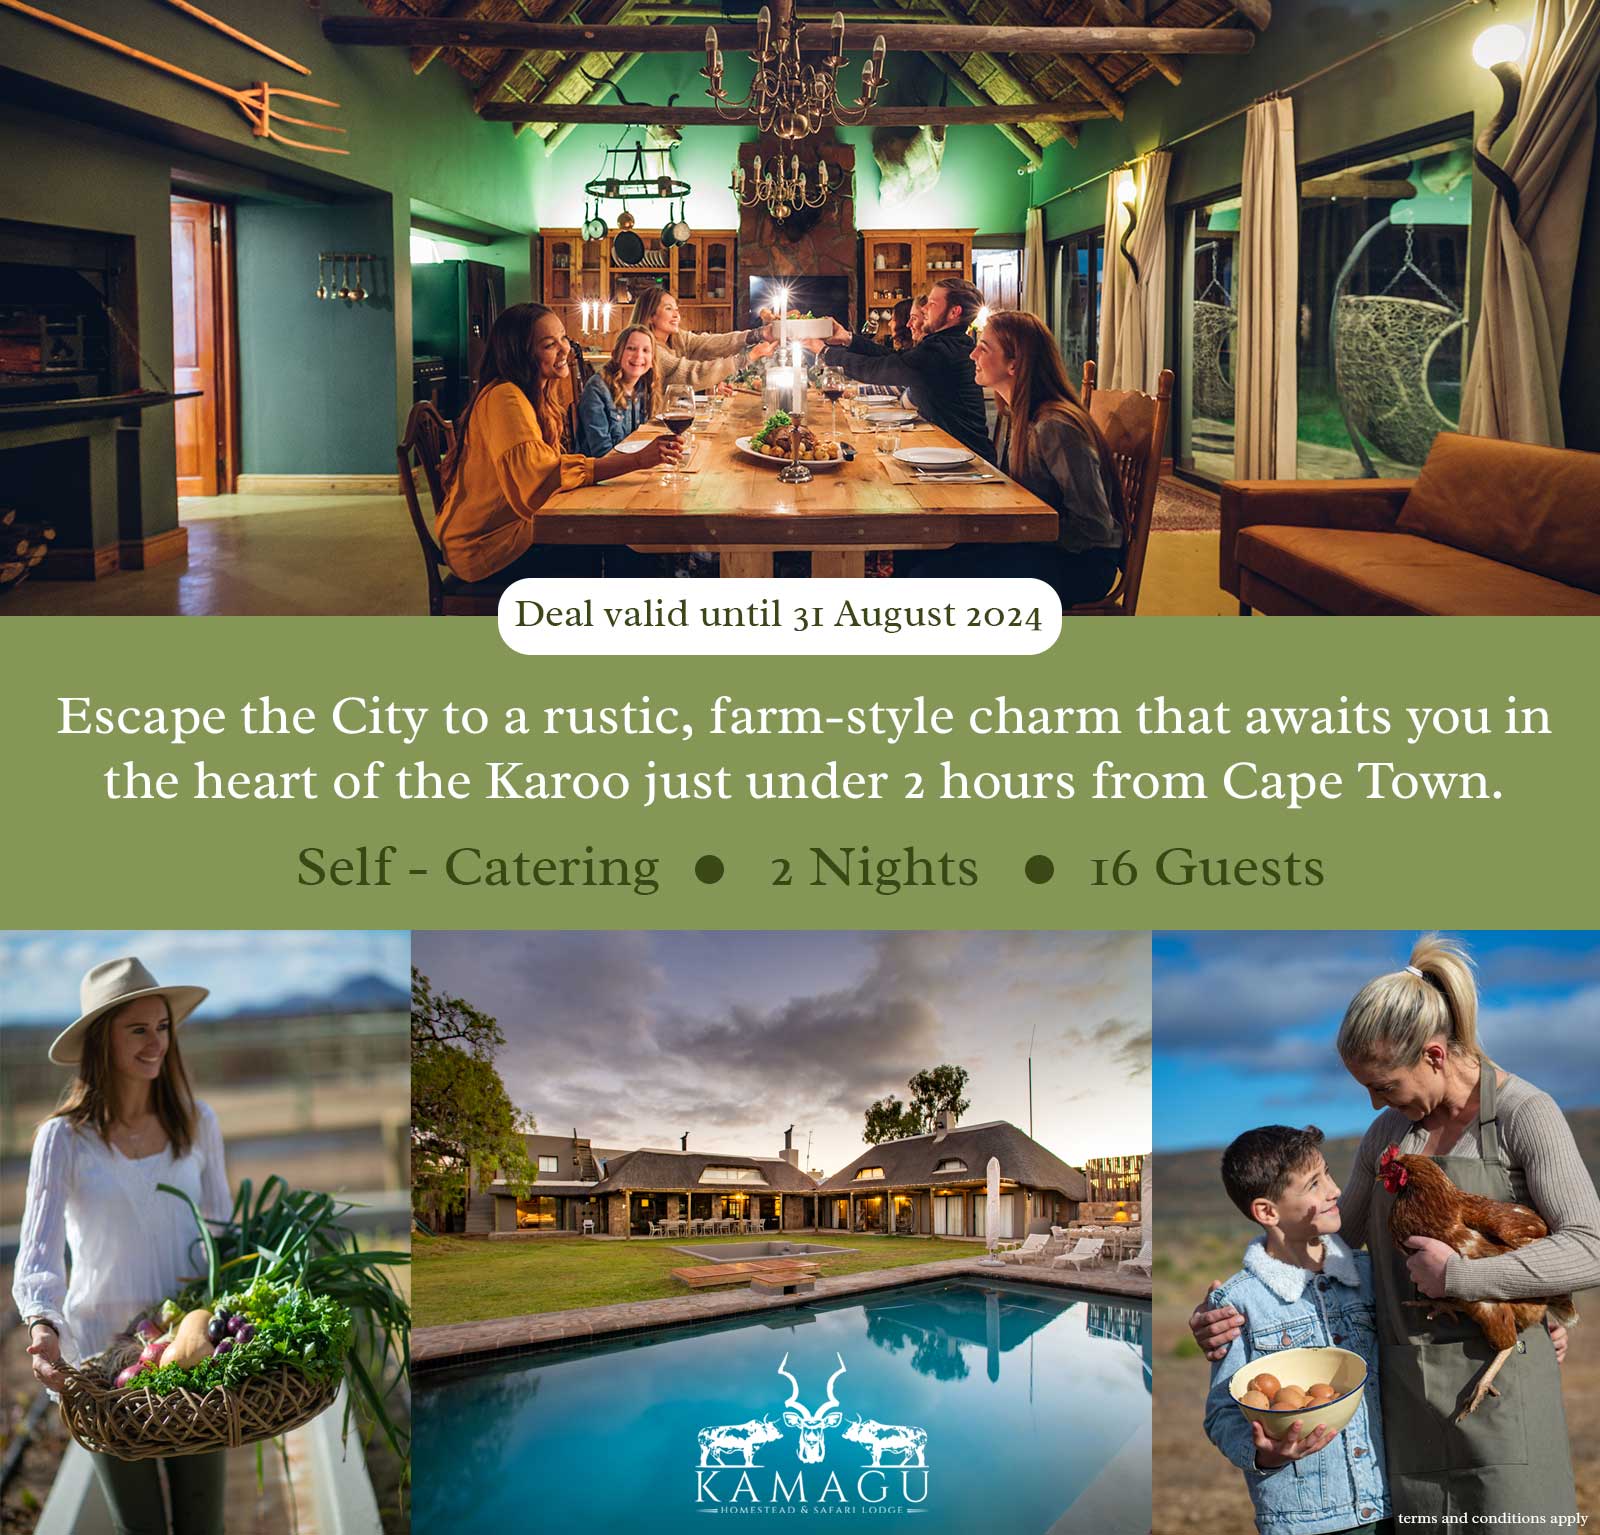 Promotional image showing images of guests and information about the 2 night winter deal and rates for Kamagu Homestead